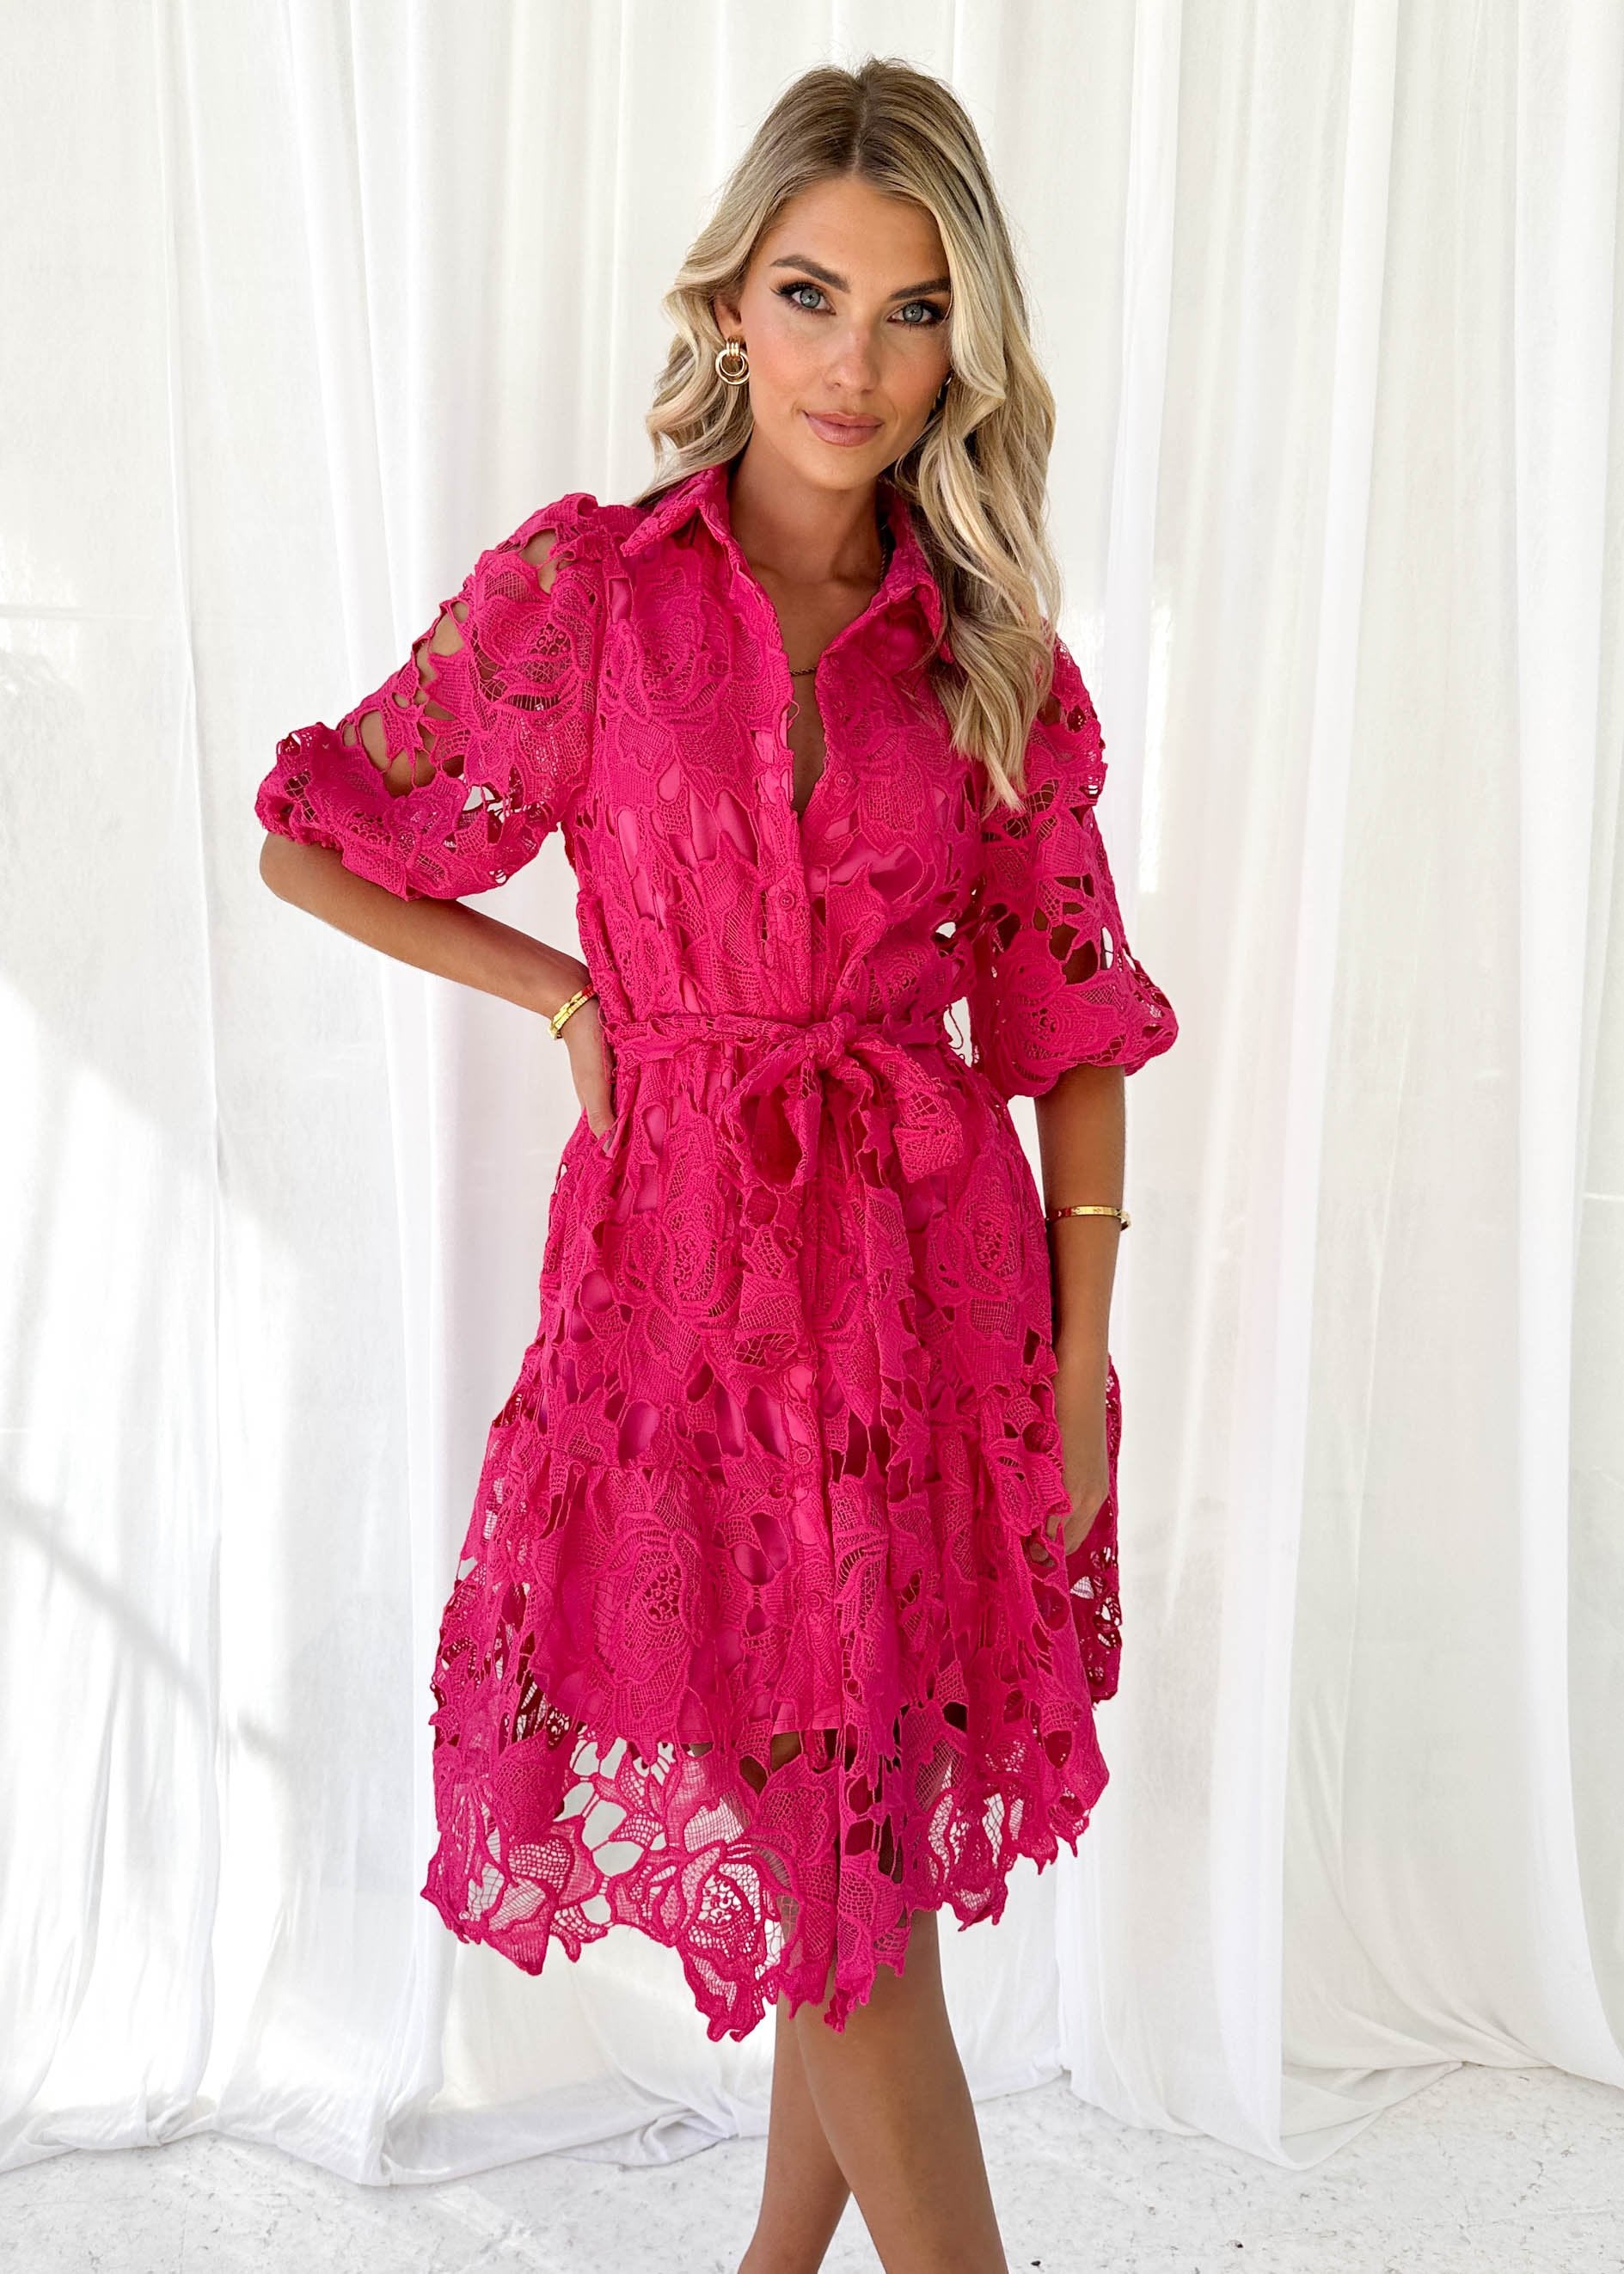 Doller Lace Dress - Hot Pink